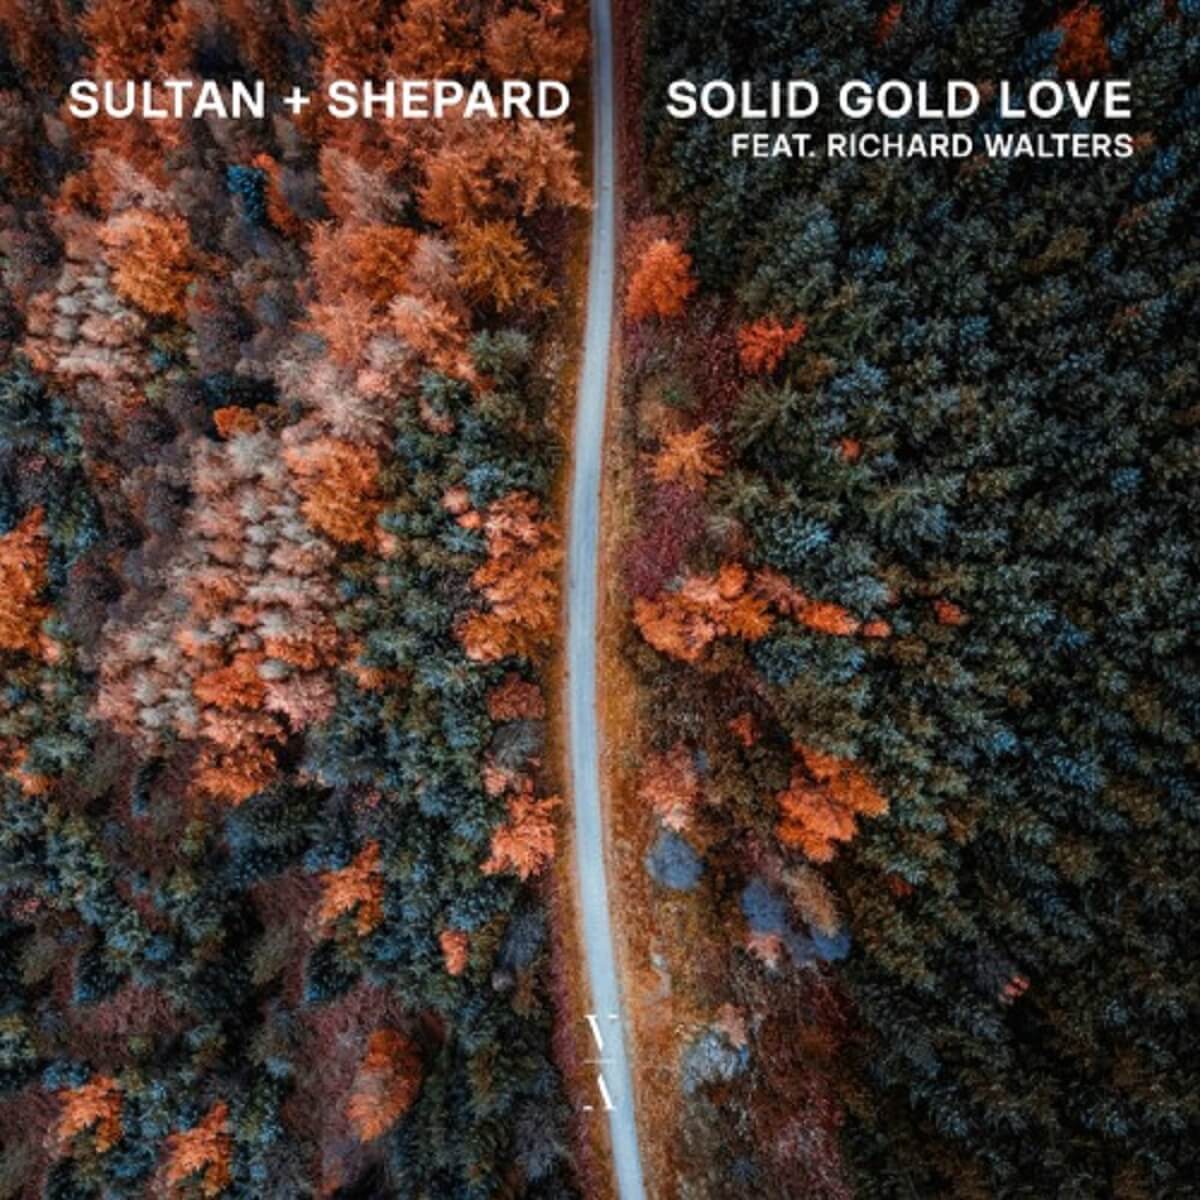 Take a Drive Through The Mountains to ‘Solid Gold Love’ by Sultan + Shepard